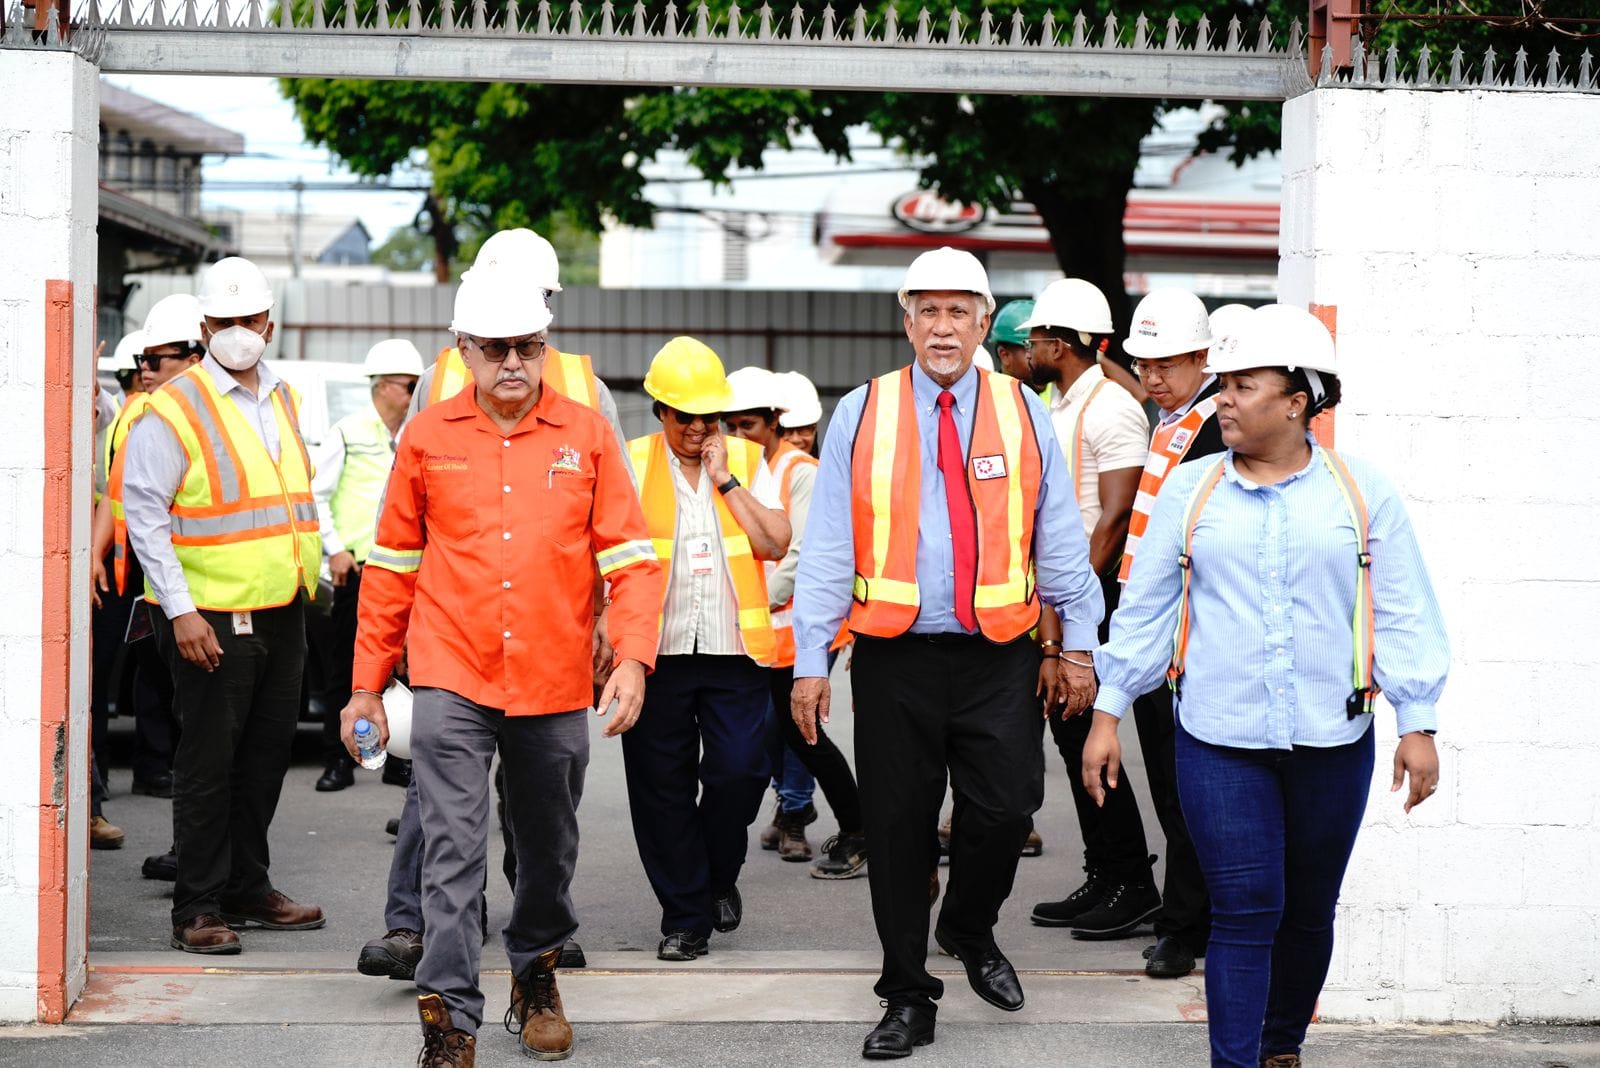 Health Minister visits Central Block POSGH site; says he’s pleased with the progress